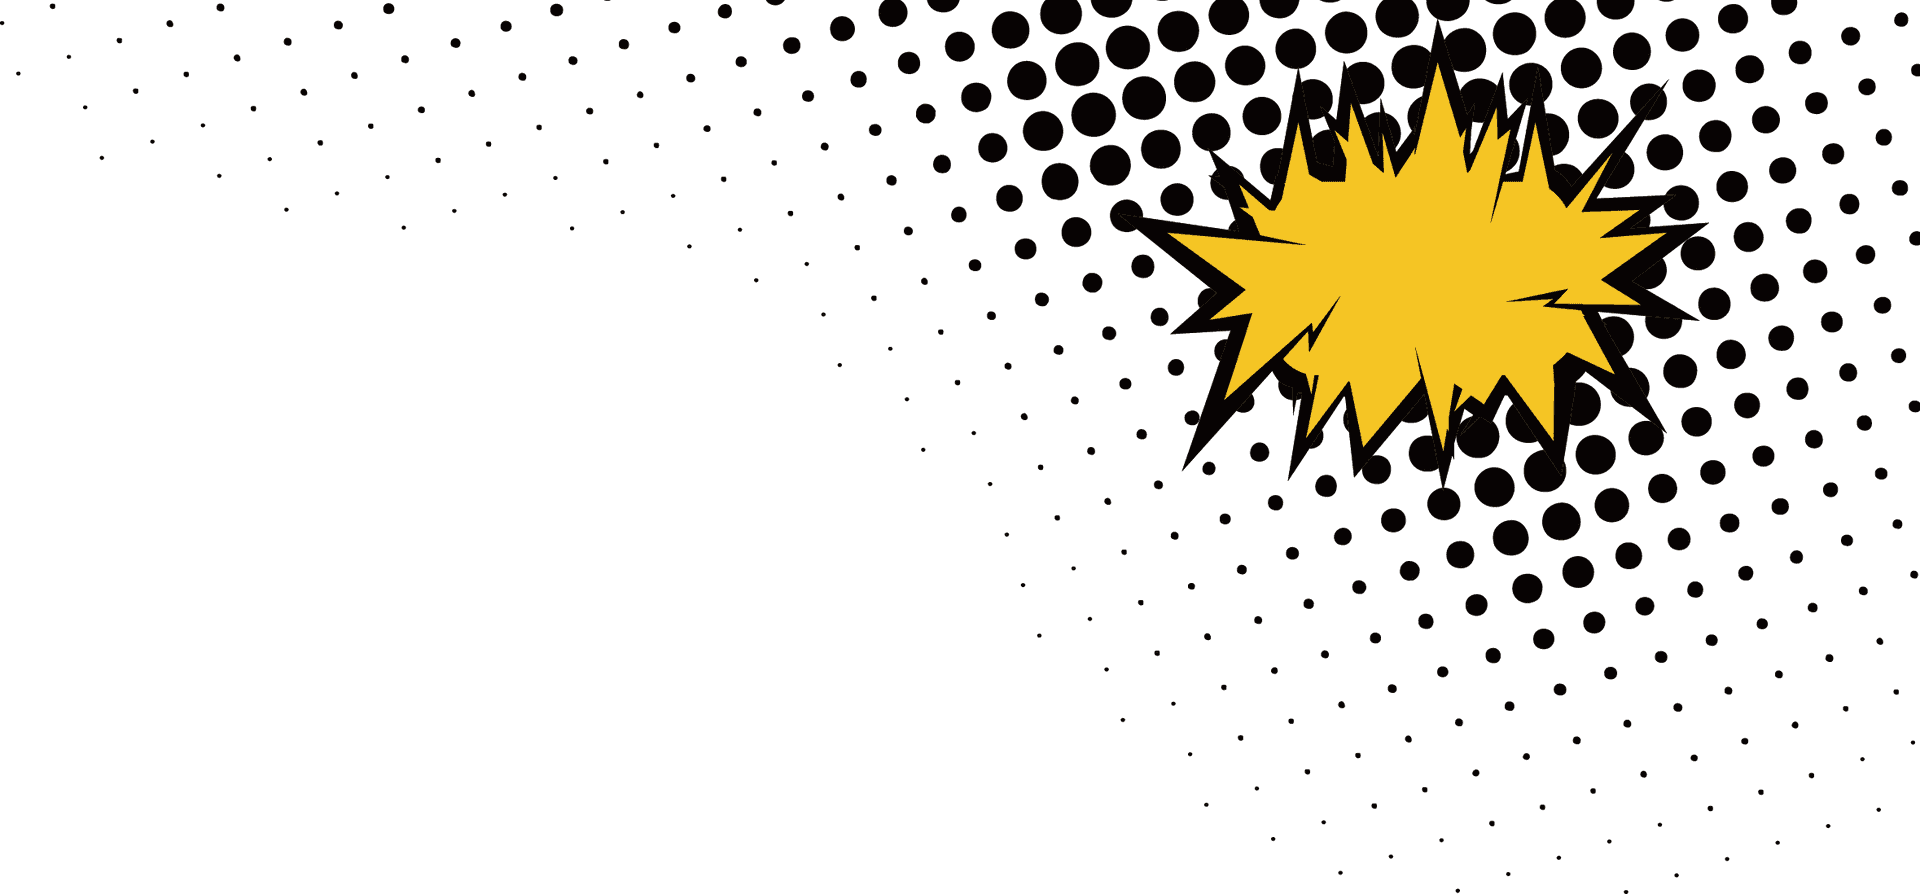 Comic Style Halftone Explosion PNG